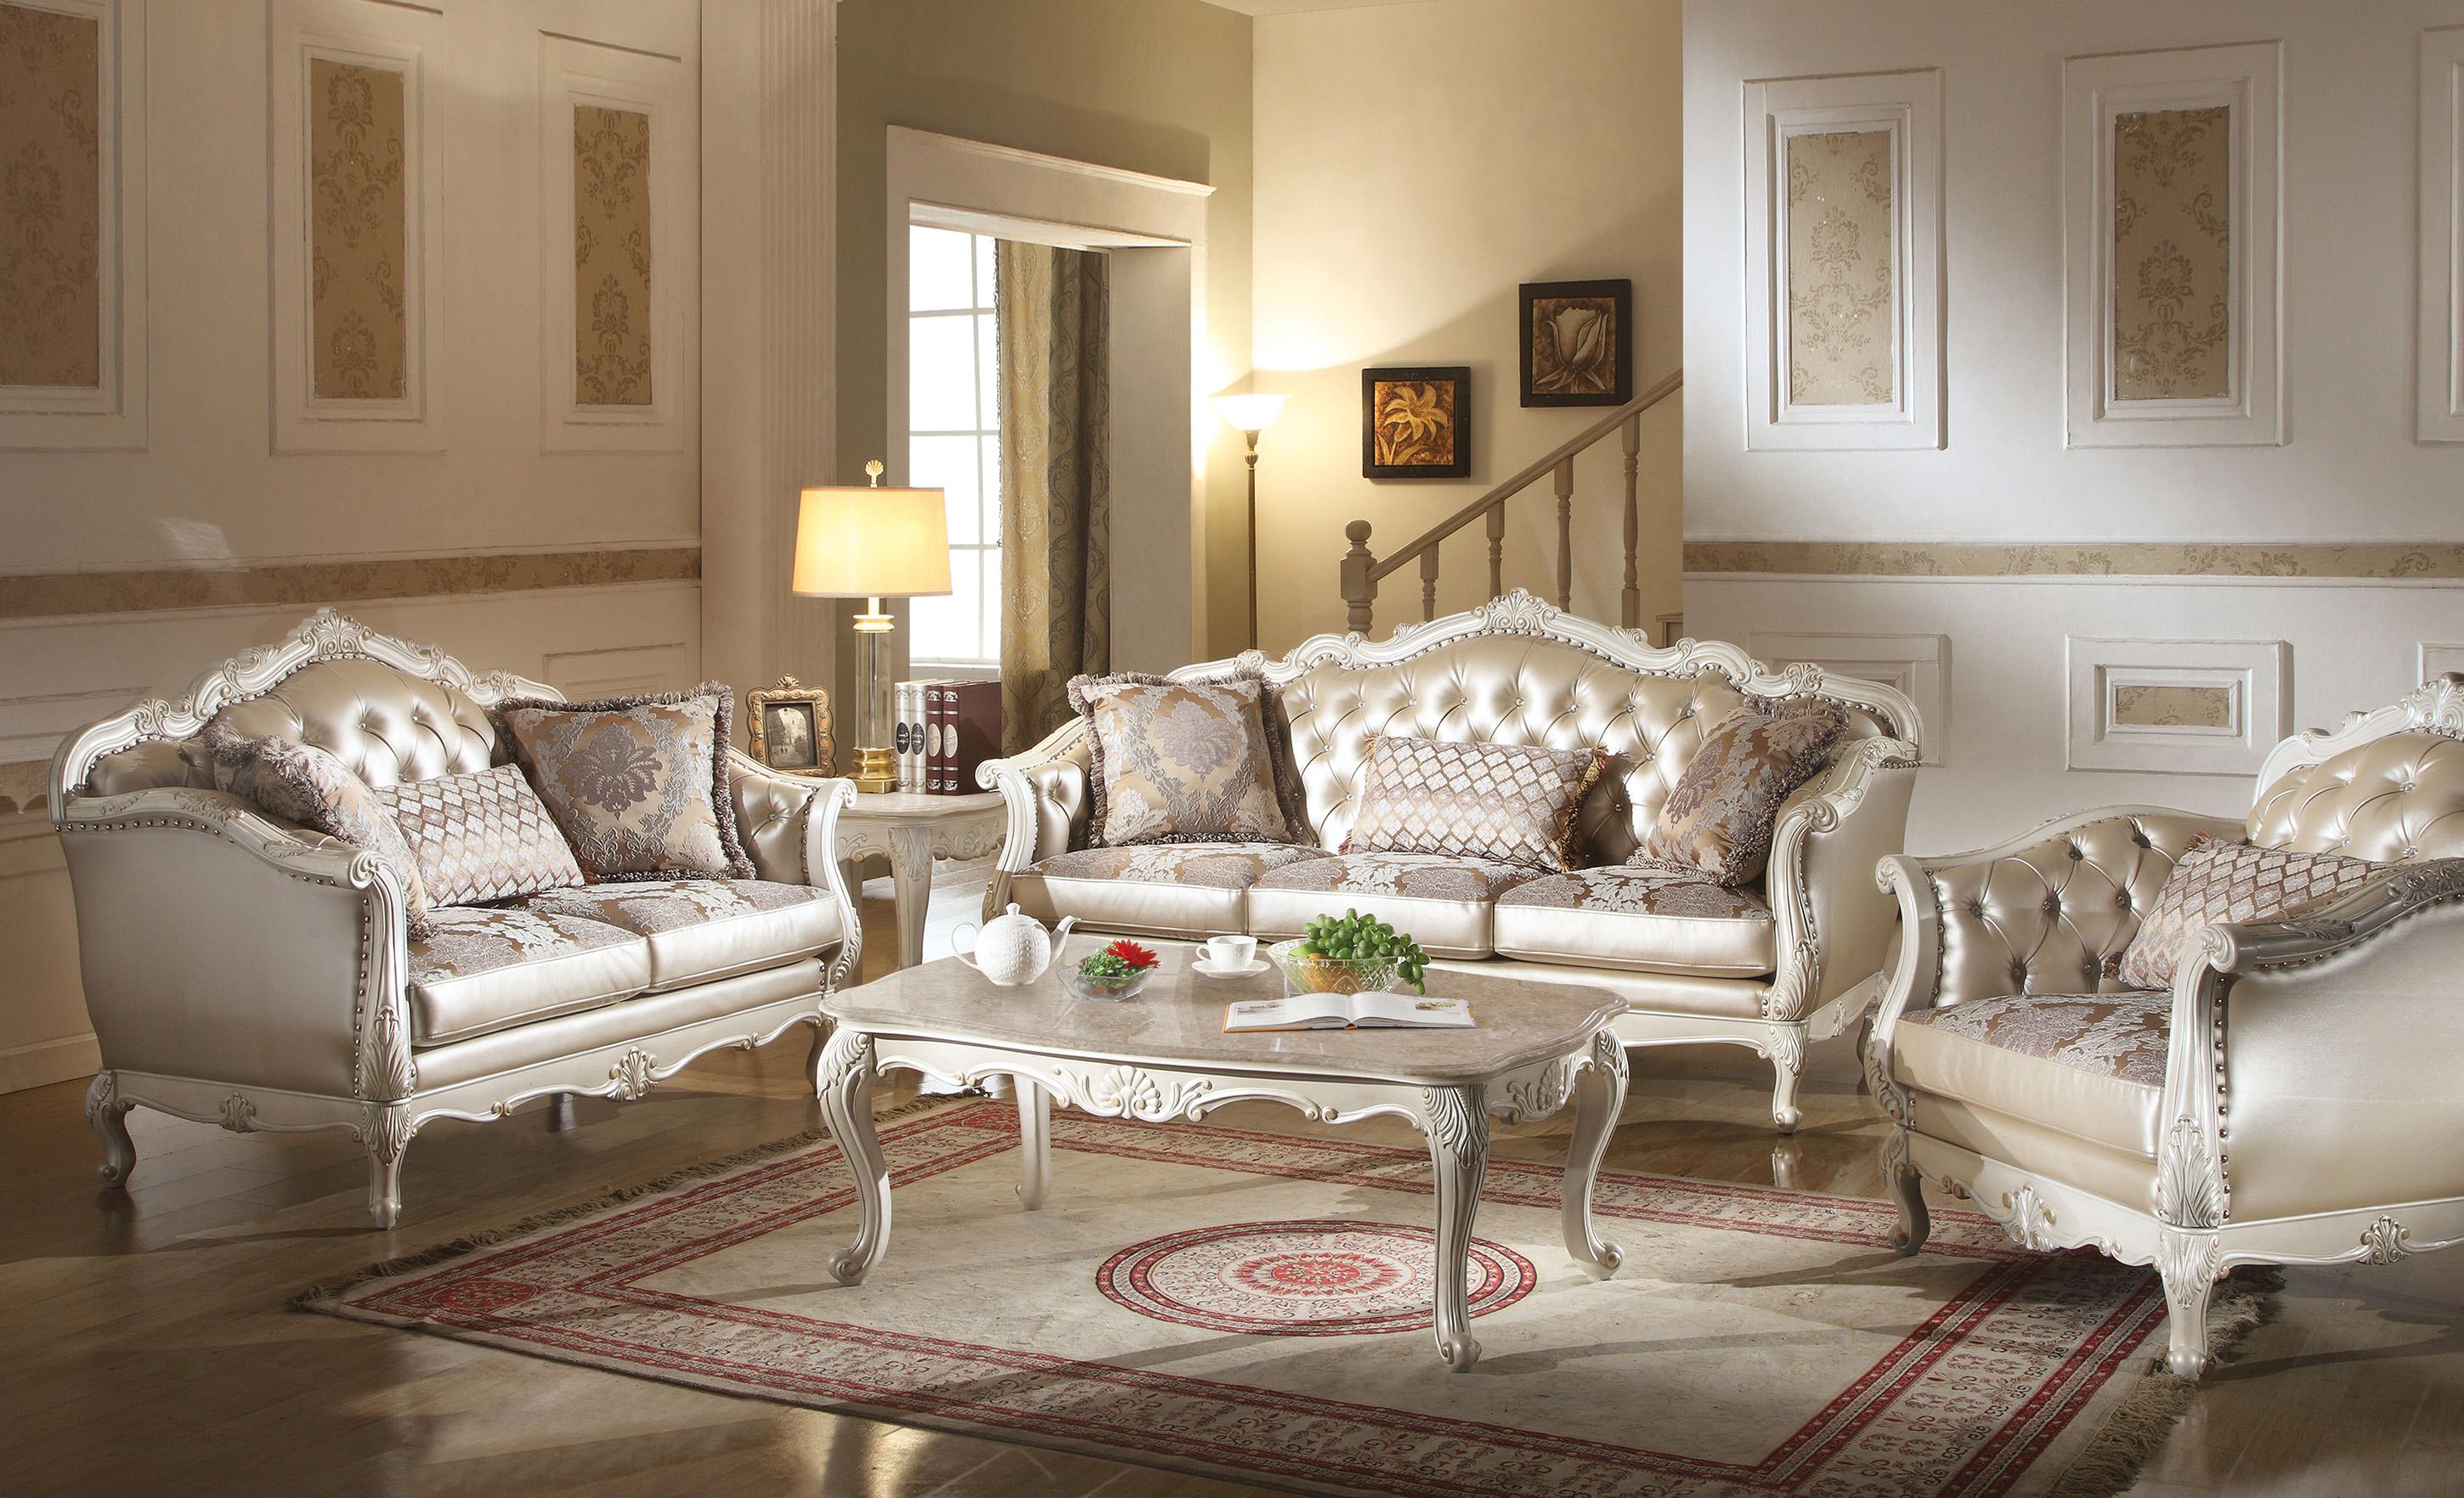 Classic, Traditional Sofa Love Chair Chantelle 53540 53540 Chantelle-Set-3 in Pearl White, Platinum Fabric